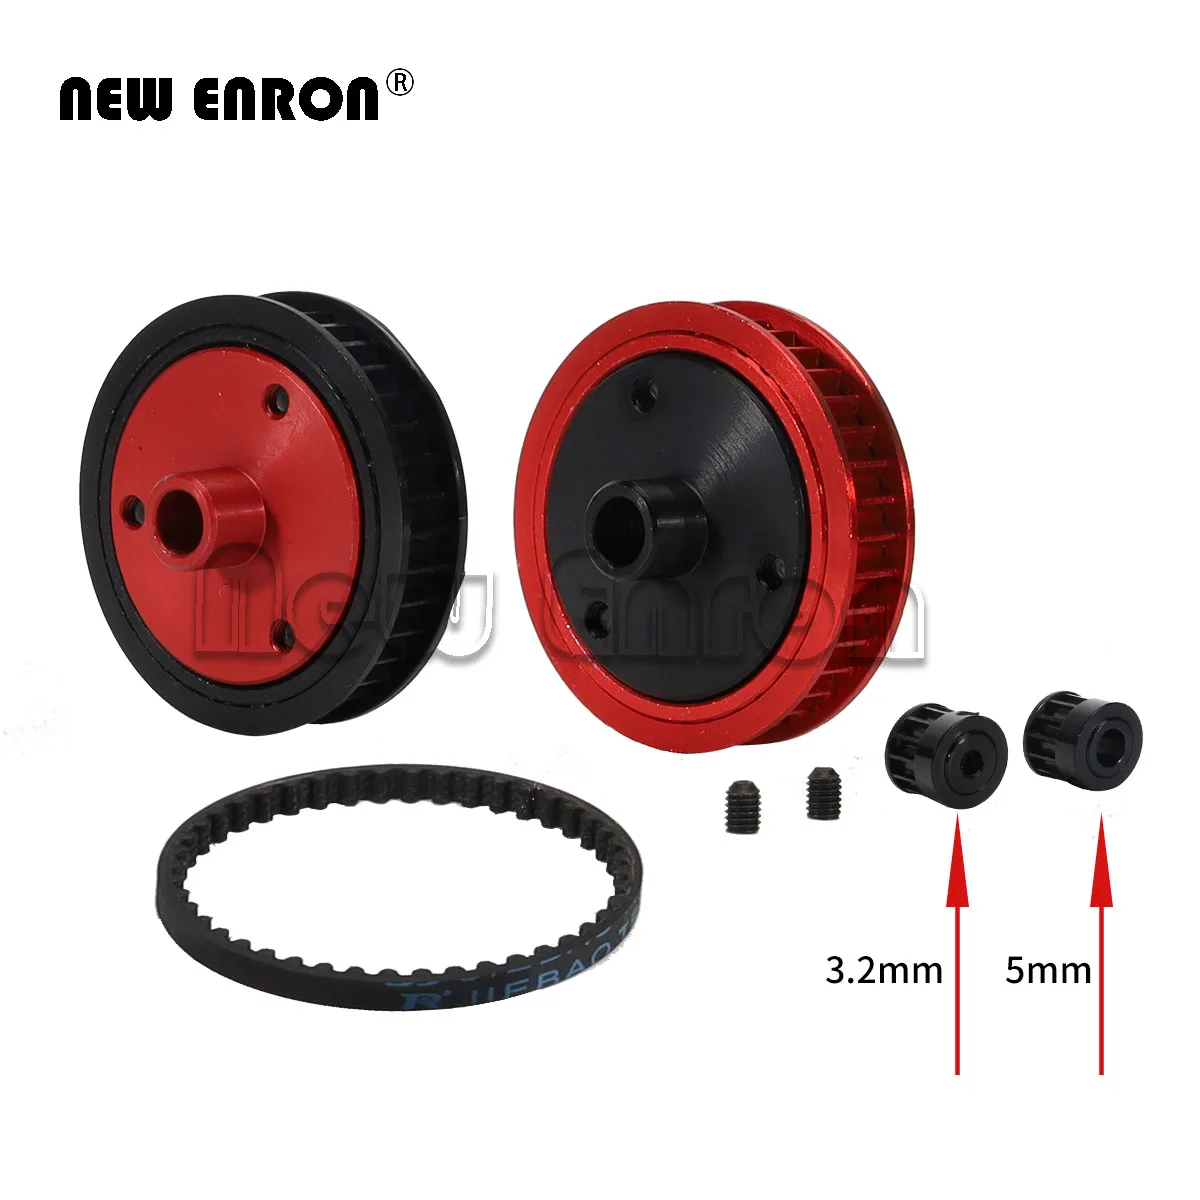 

NEW ENRON Belt Drive Transmission Gears System 3.2/5.0mm for 1/10 RC Car Crawler Axial SCX10 & SCX10 II 90046 Upgrade DIY Parts